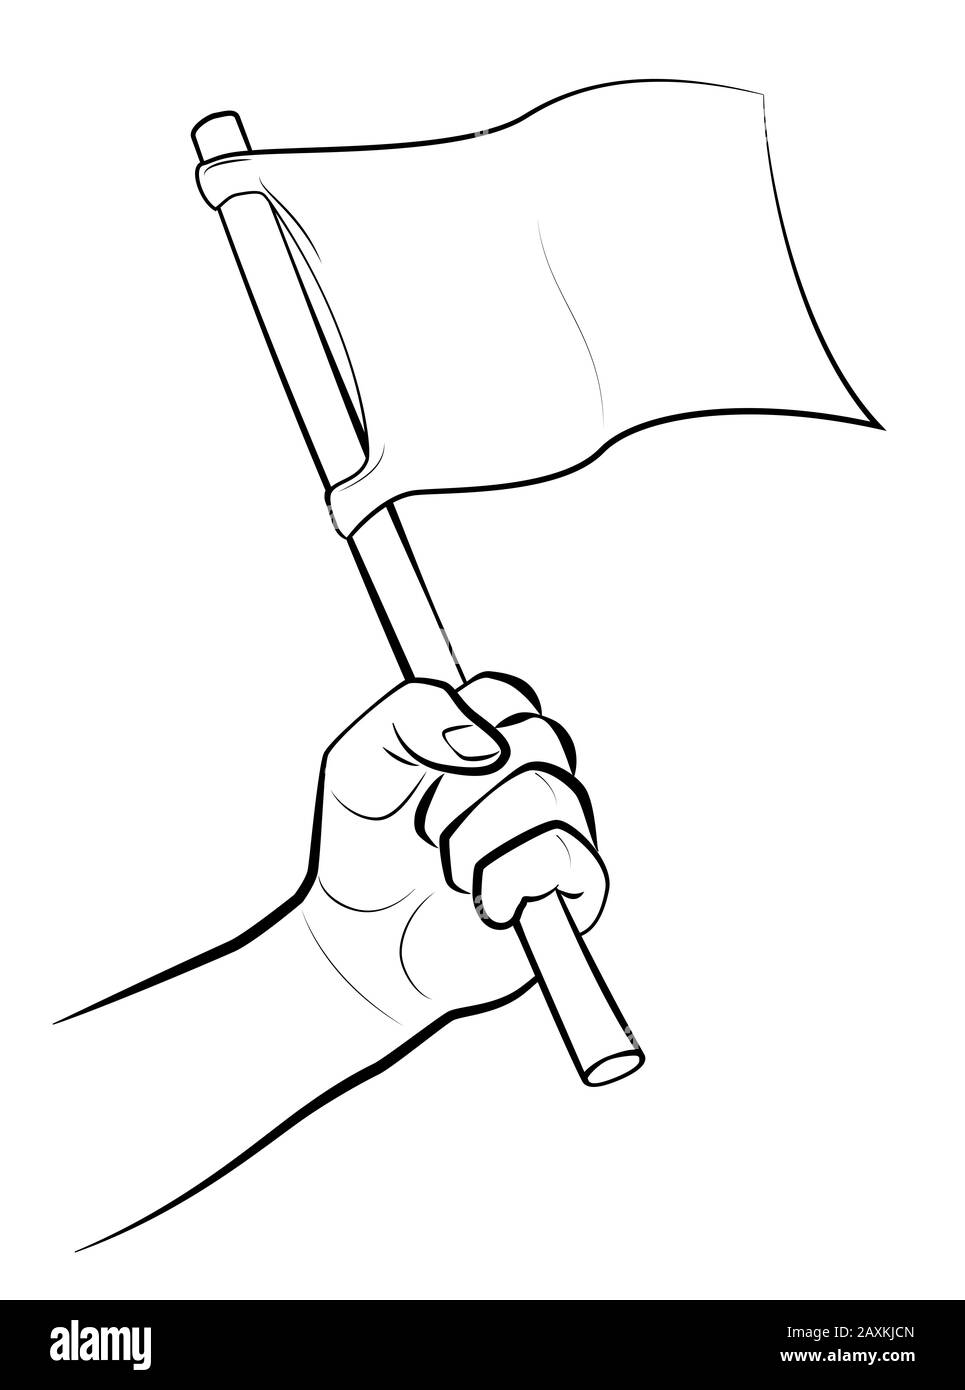 Waving white flag. Male hand with symbol or signal for surrender, capitulation, conceding victory or offering peace  - comic illustration. Stock Photo